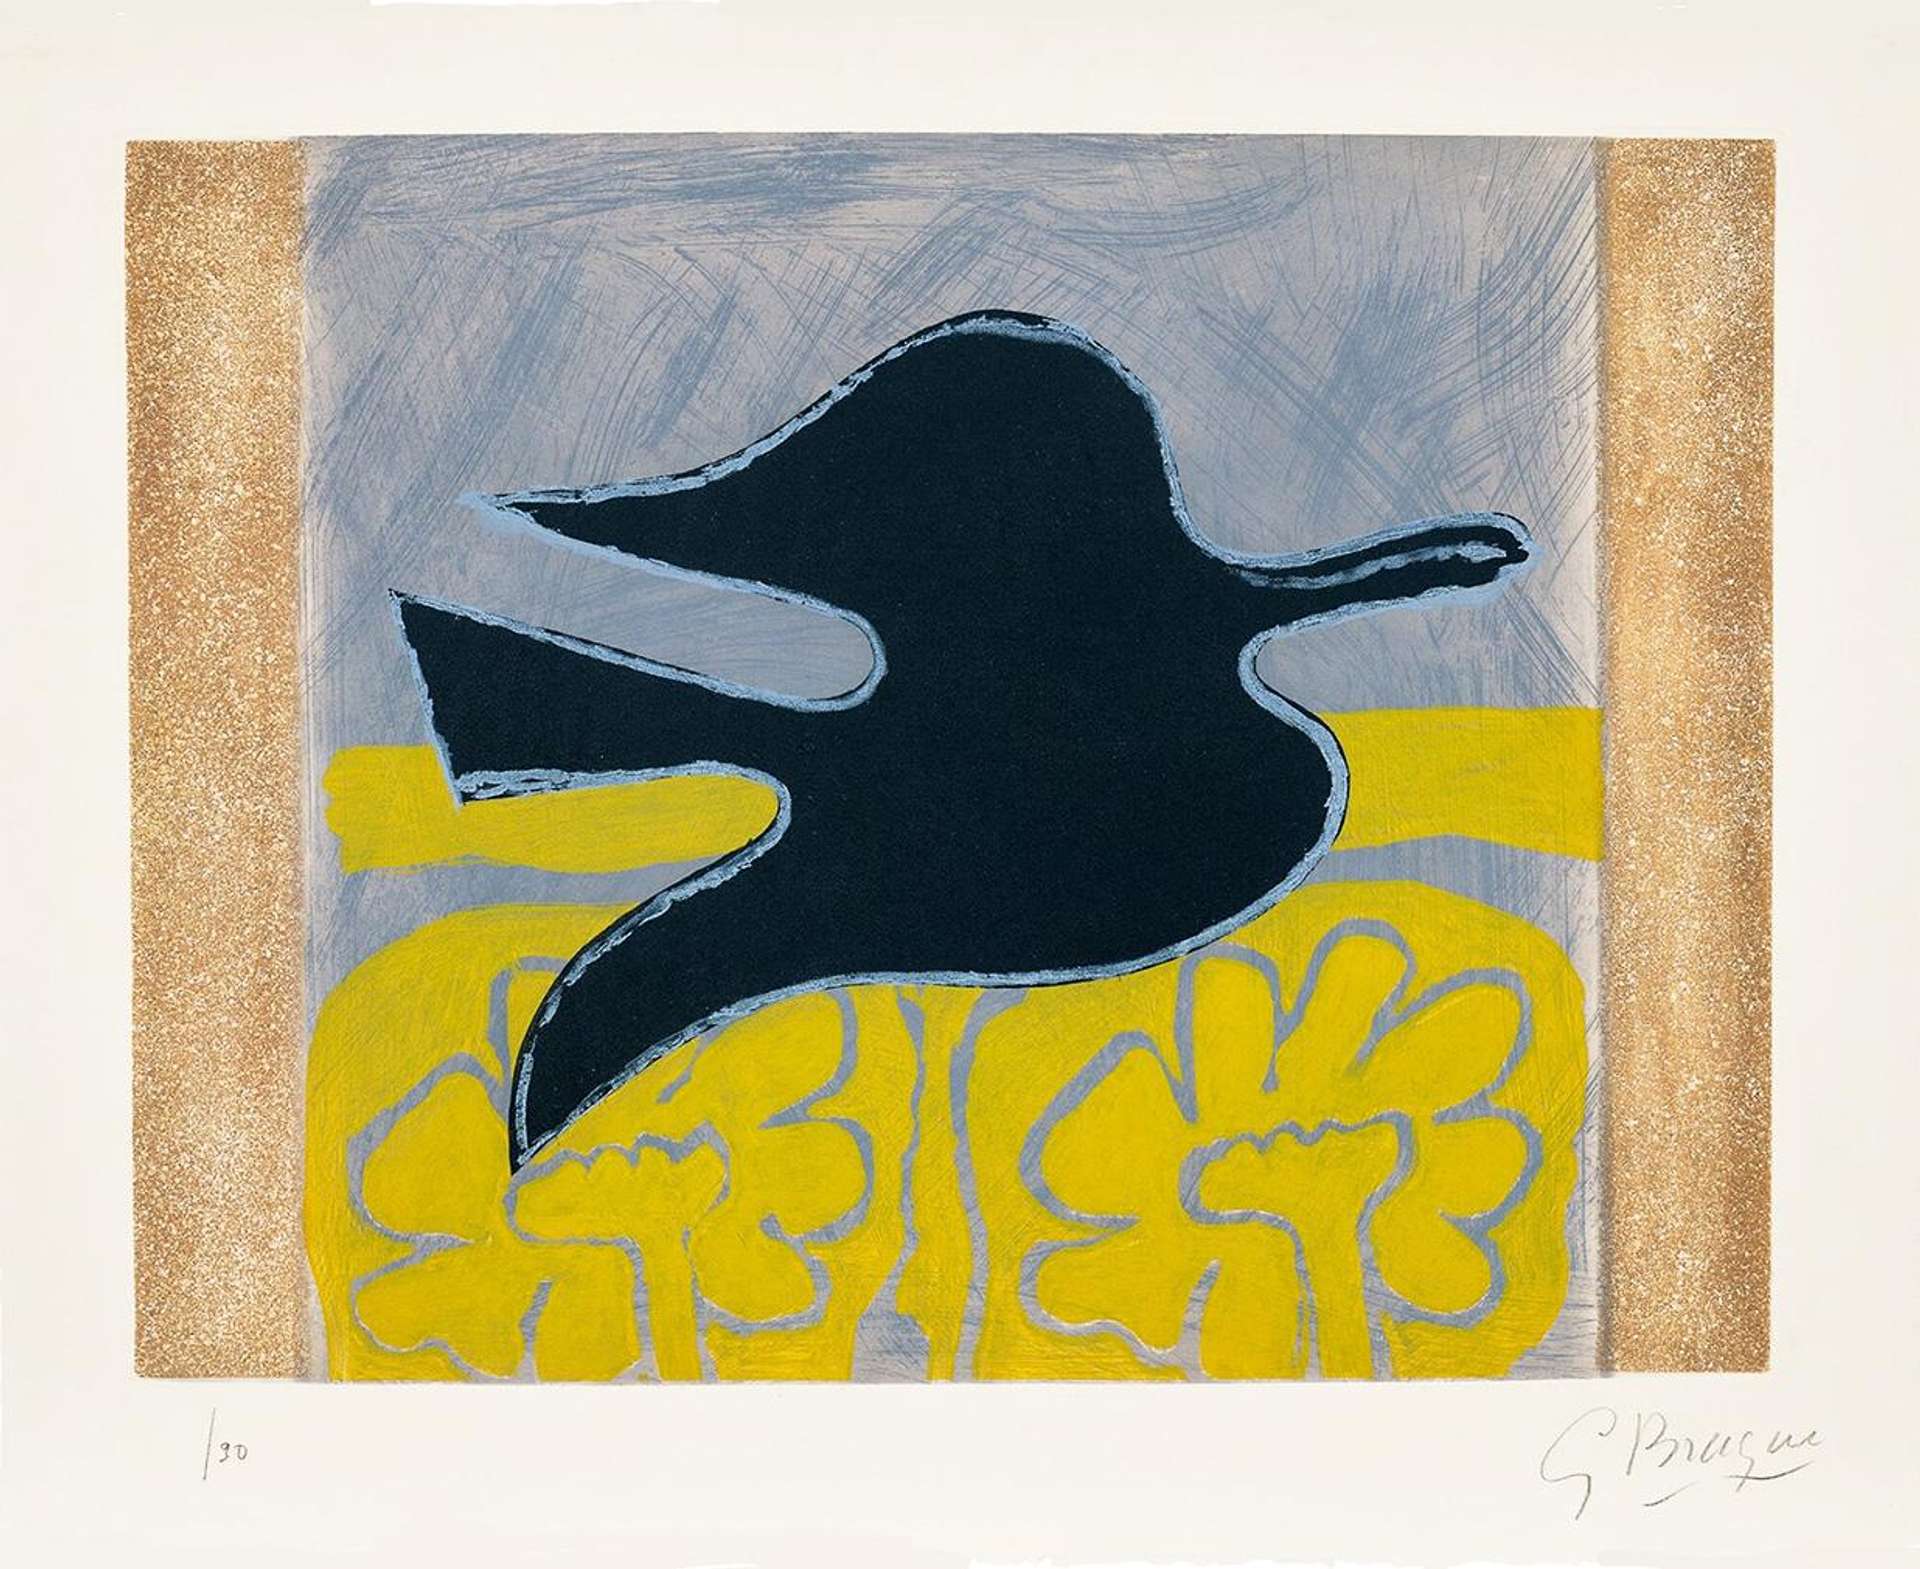 This print shows a black, curved bird against a blue and yellow background.